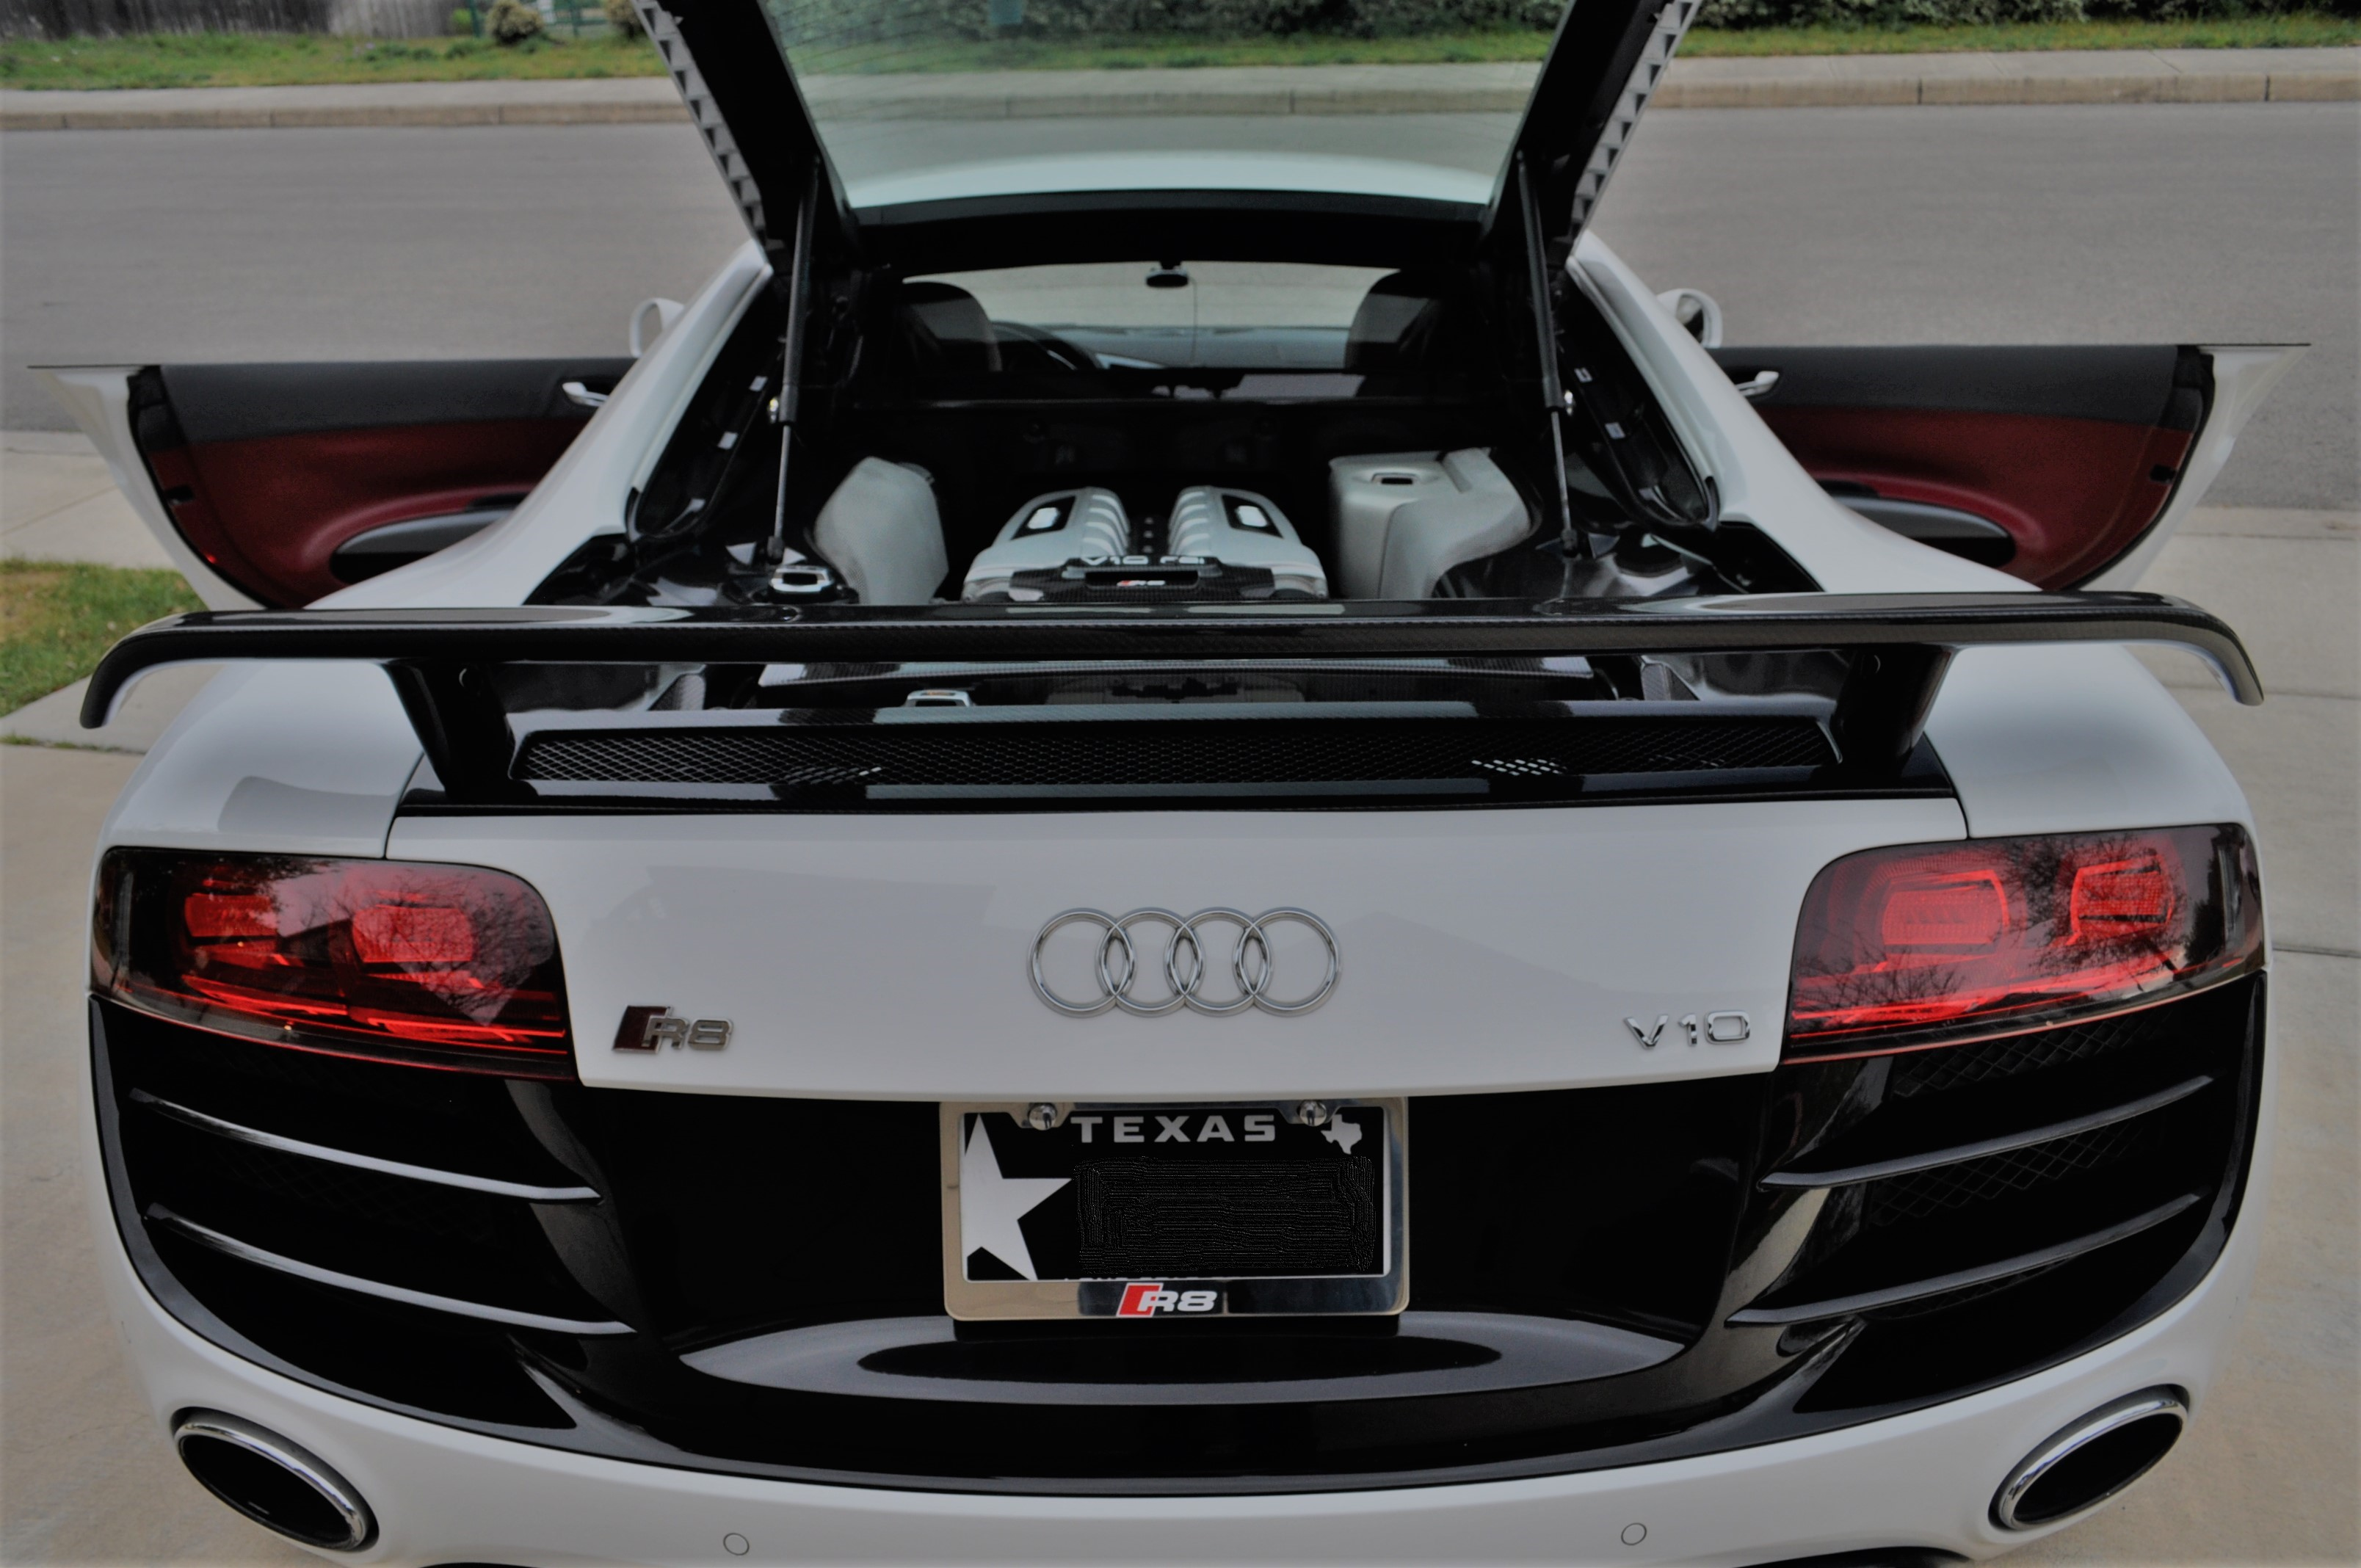 Audi R8 GT Wing is our most popular found. our customer service will make you know you're in the right place